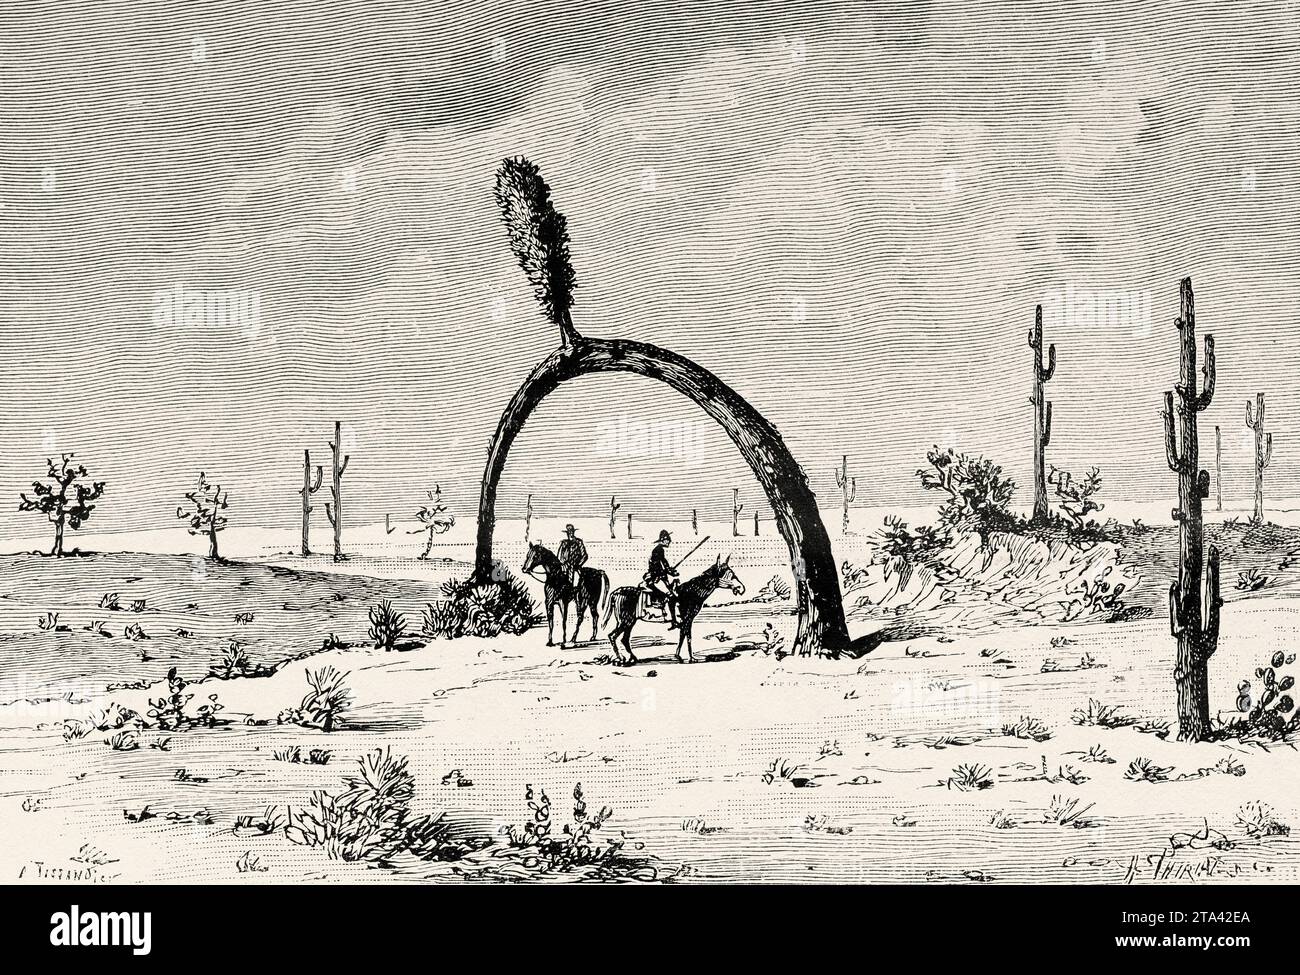 Giant Yucca at Mojave Desert, California, USA. Old illustration by Tissandier from La Nature 1887 Stock Photo